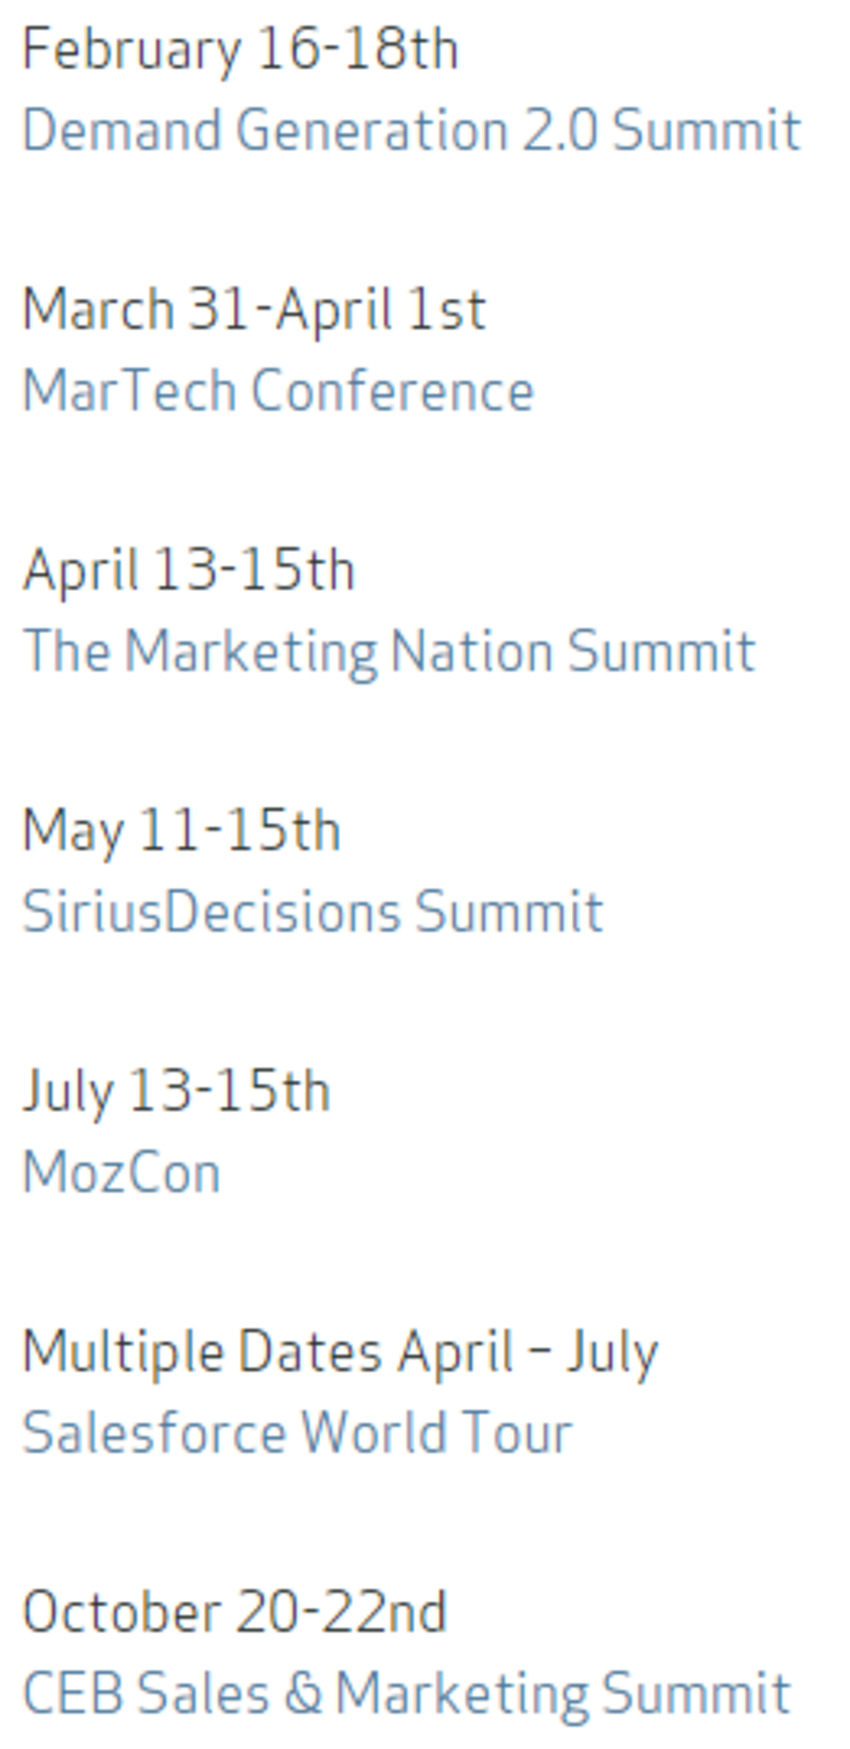 7 Data-Driven Marketing Events To Add To Your Calendar Now - Radius | The MarTech Digest | Scoop.it